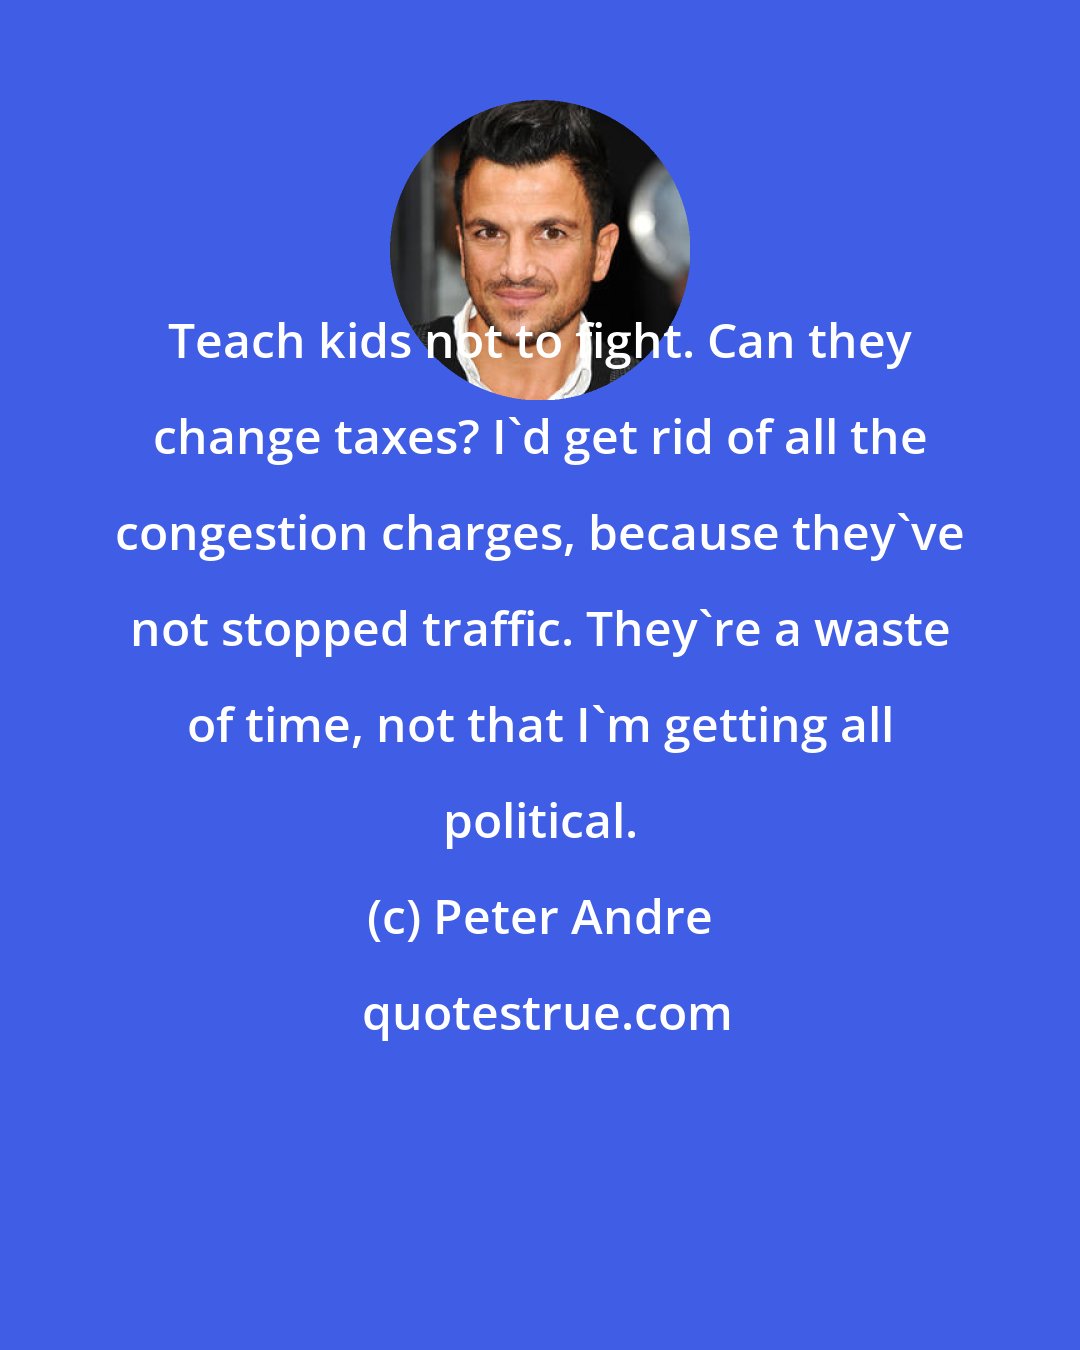 Peter Andre: Teach kids not to fight. Can they change taxes? I'd get rid of all the congestion charges, because they've not stopped traffic. They're a waste of time, not that I'm getting all political.